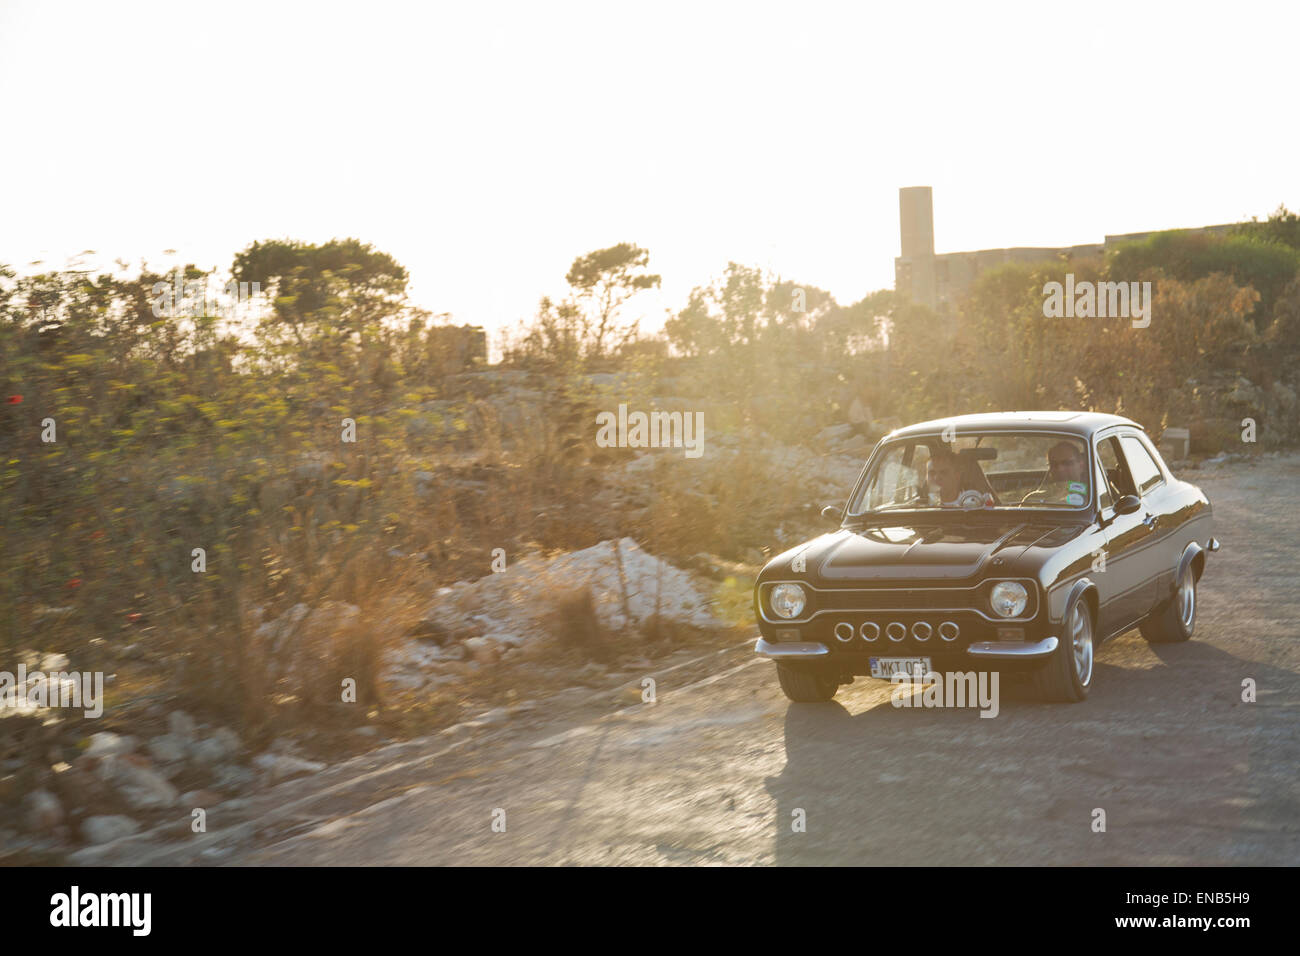 Ford MKI Escort in Malta, black car in motion with a natural sun flare Stock Photo